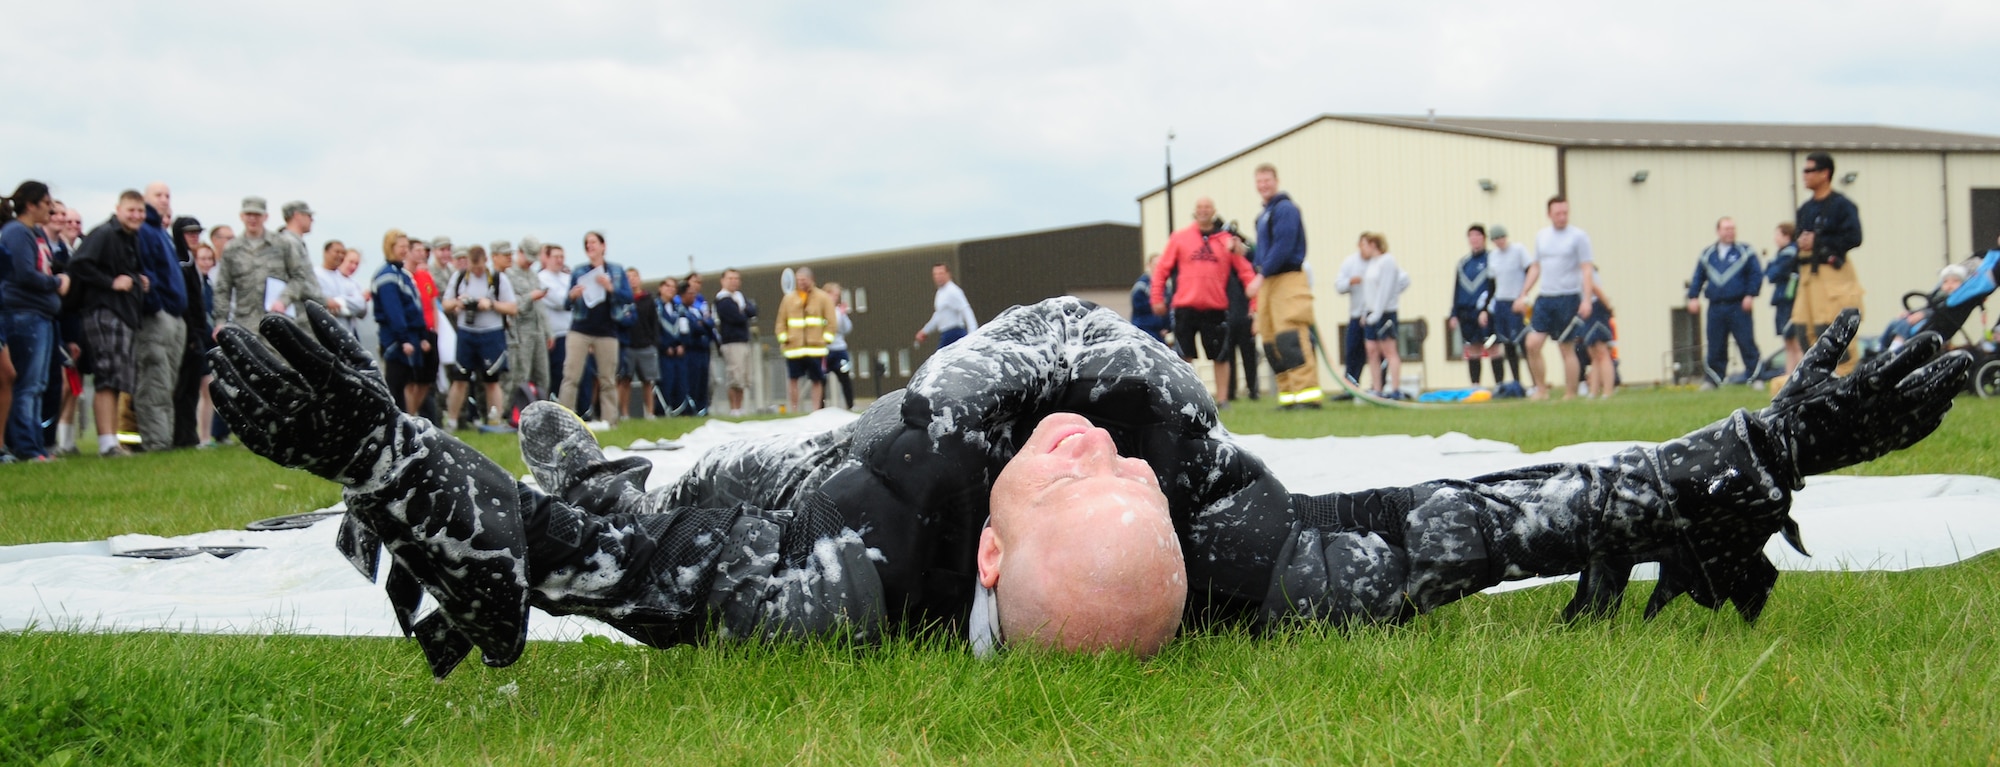 “Batman” (Master Sgt. Thomas Wagner, 100th Maintenance Squadron first sergeant) admits defeat after doing the “slip-n-slide” May 10, 2013, at a post Unit Effectiveness Inspection on RAF Mildenhall, England. Batman also took part in the hurdles, arm wrestling and tug of war events, competing against Col. Christopher Kulas, 100th Air Refueling Wing commander, and other Team Mildenhall Airmen. (U.S. Air Force photo by Karen Abeyasekere/Released)